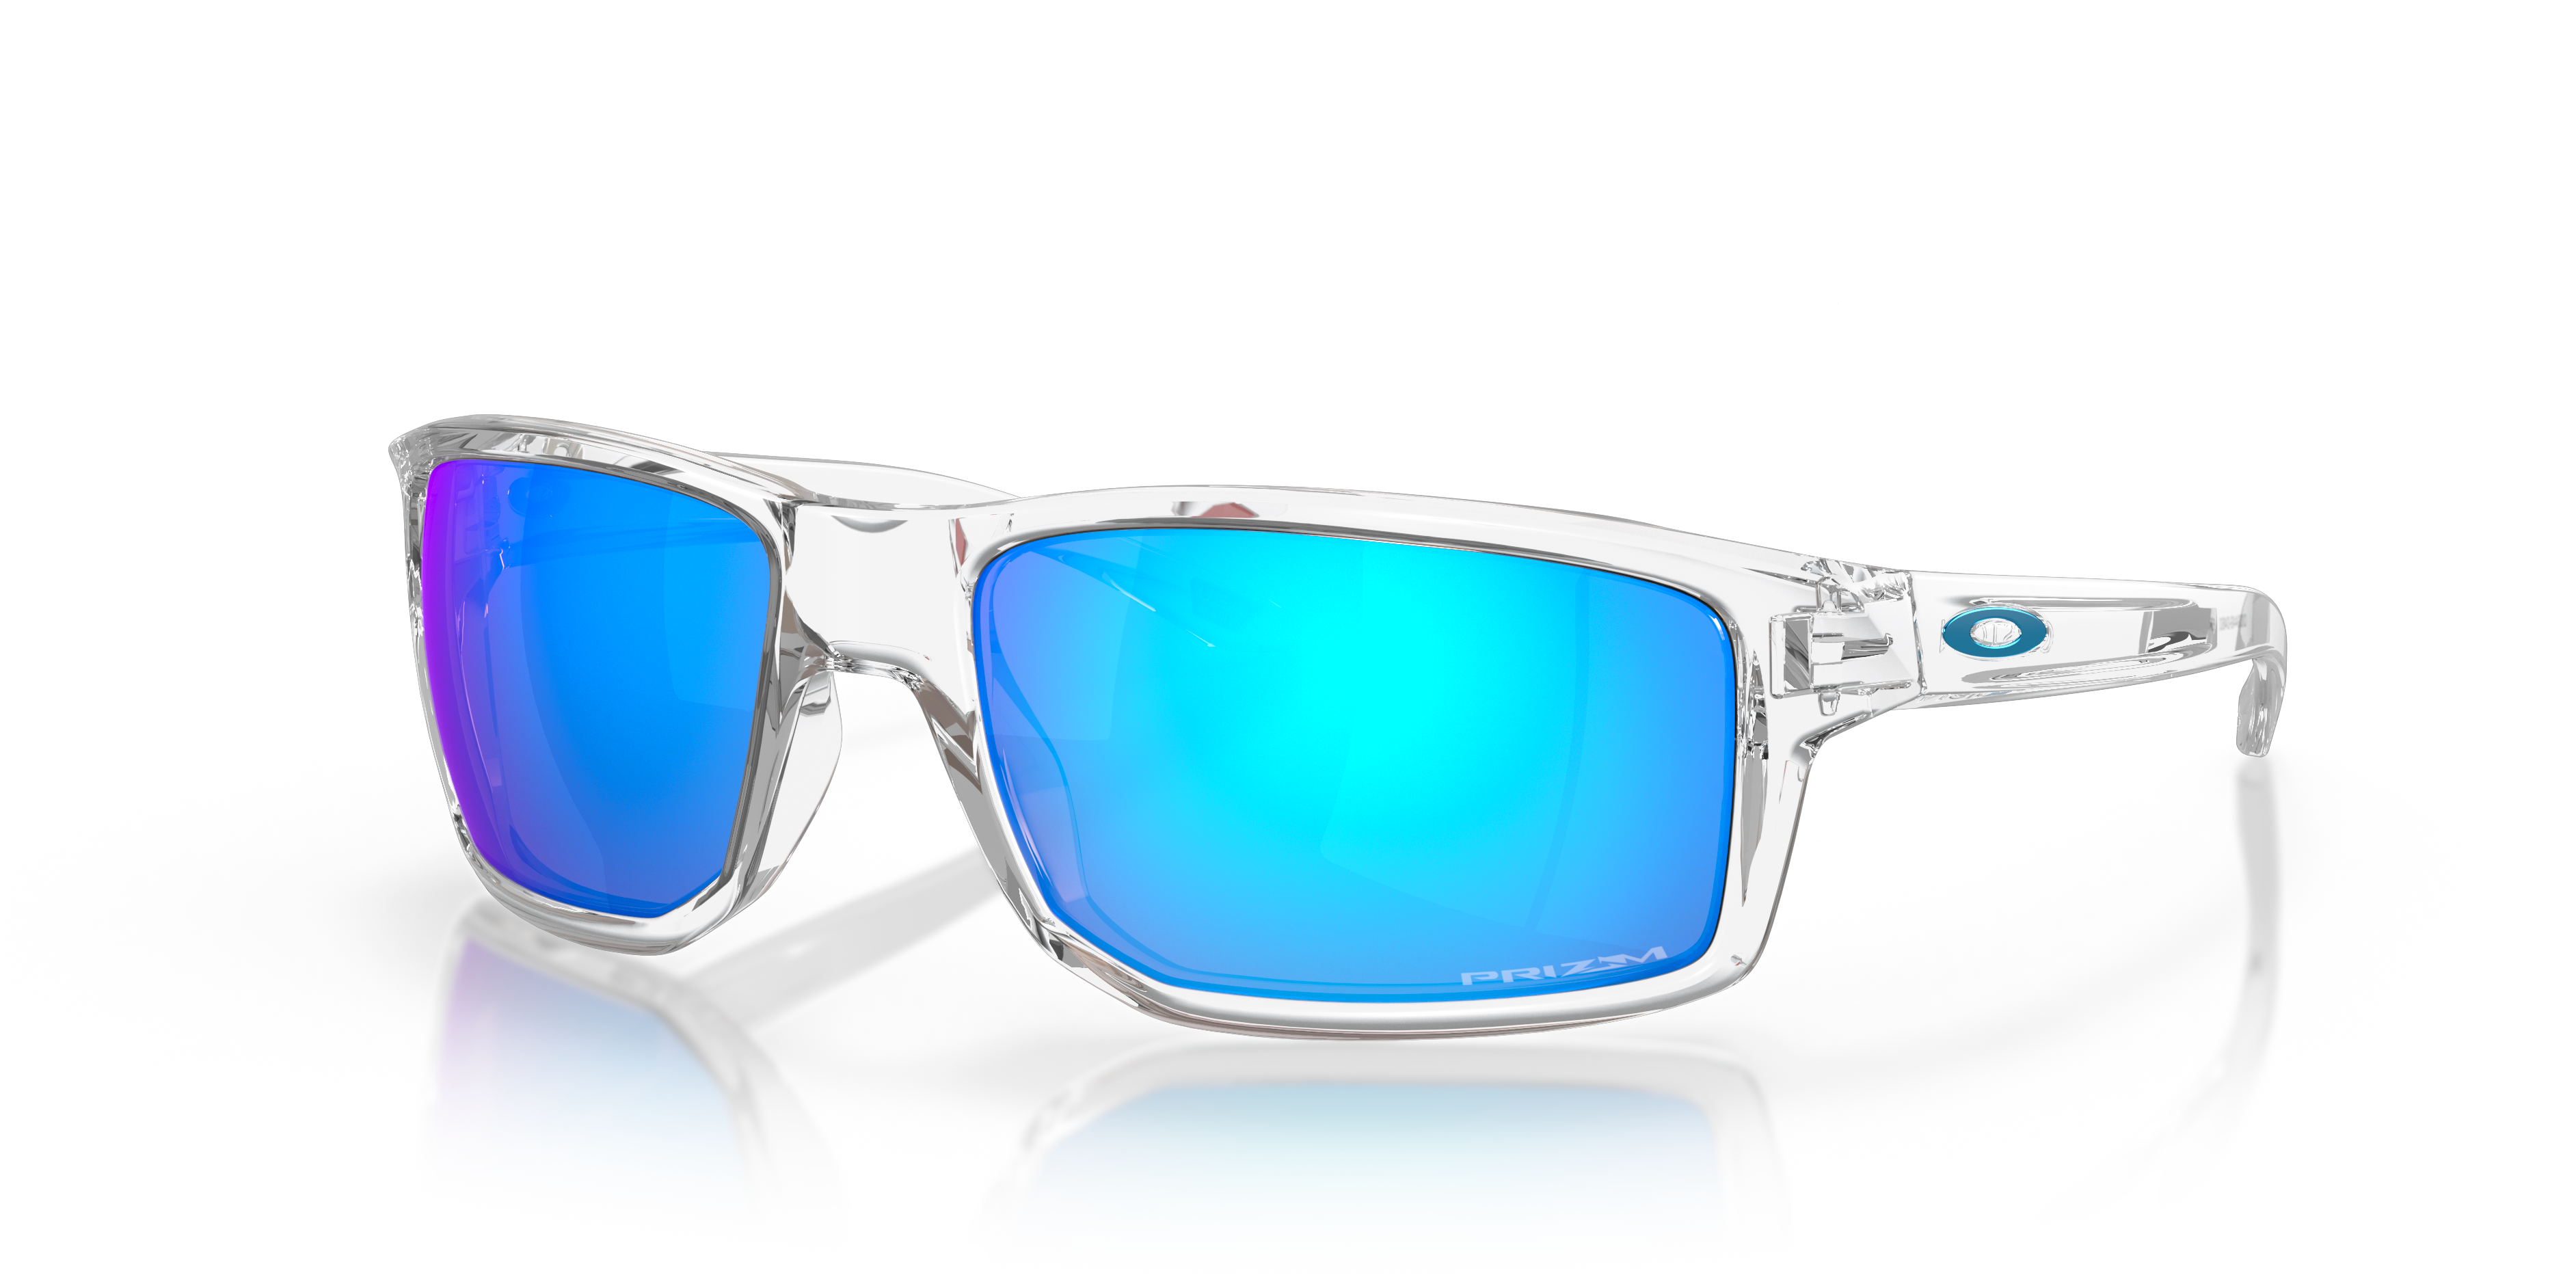 Oakley OO9449 Gibston 61 Prizm Sapphire & Polished Clear Sunglasses